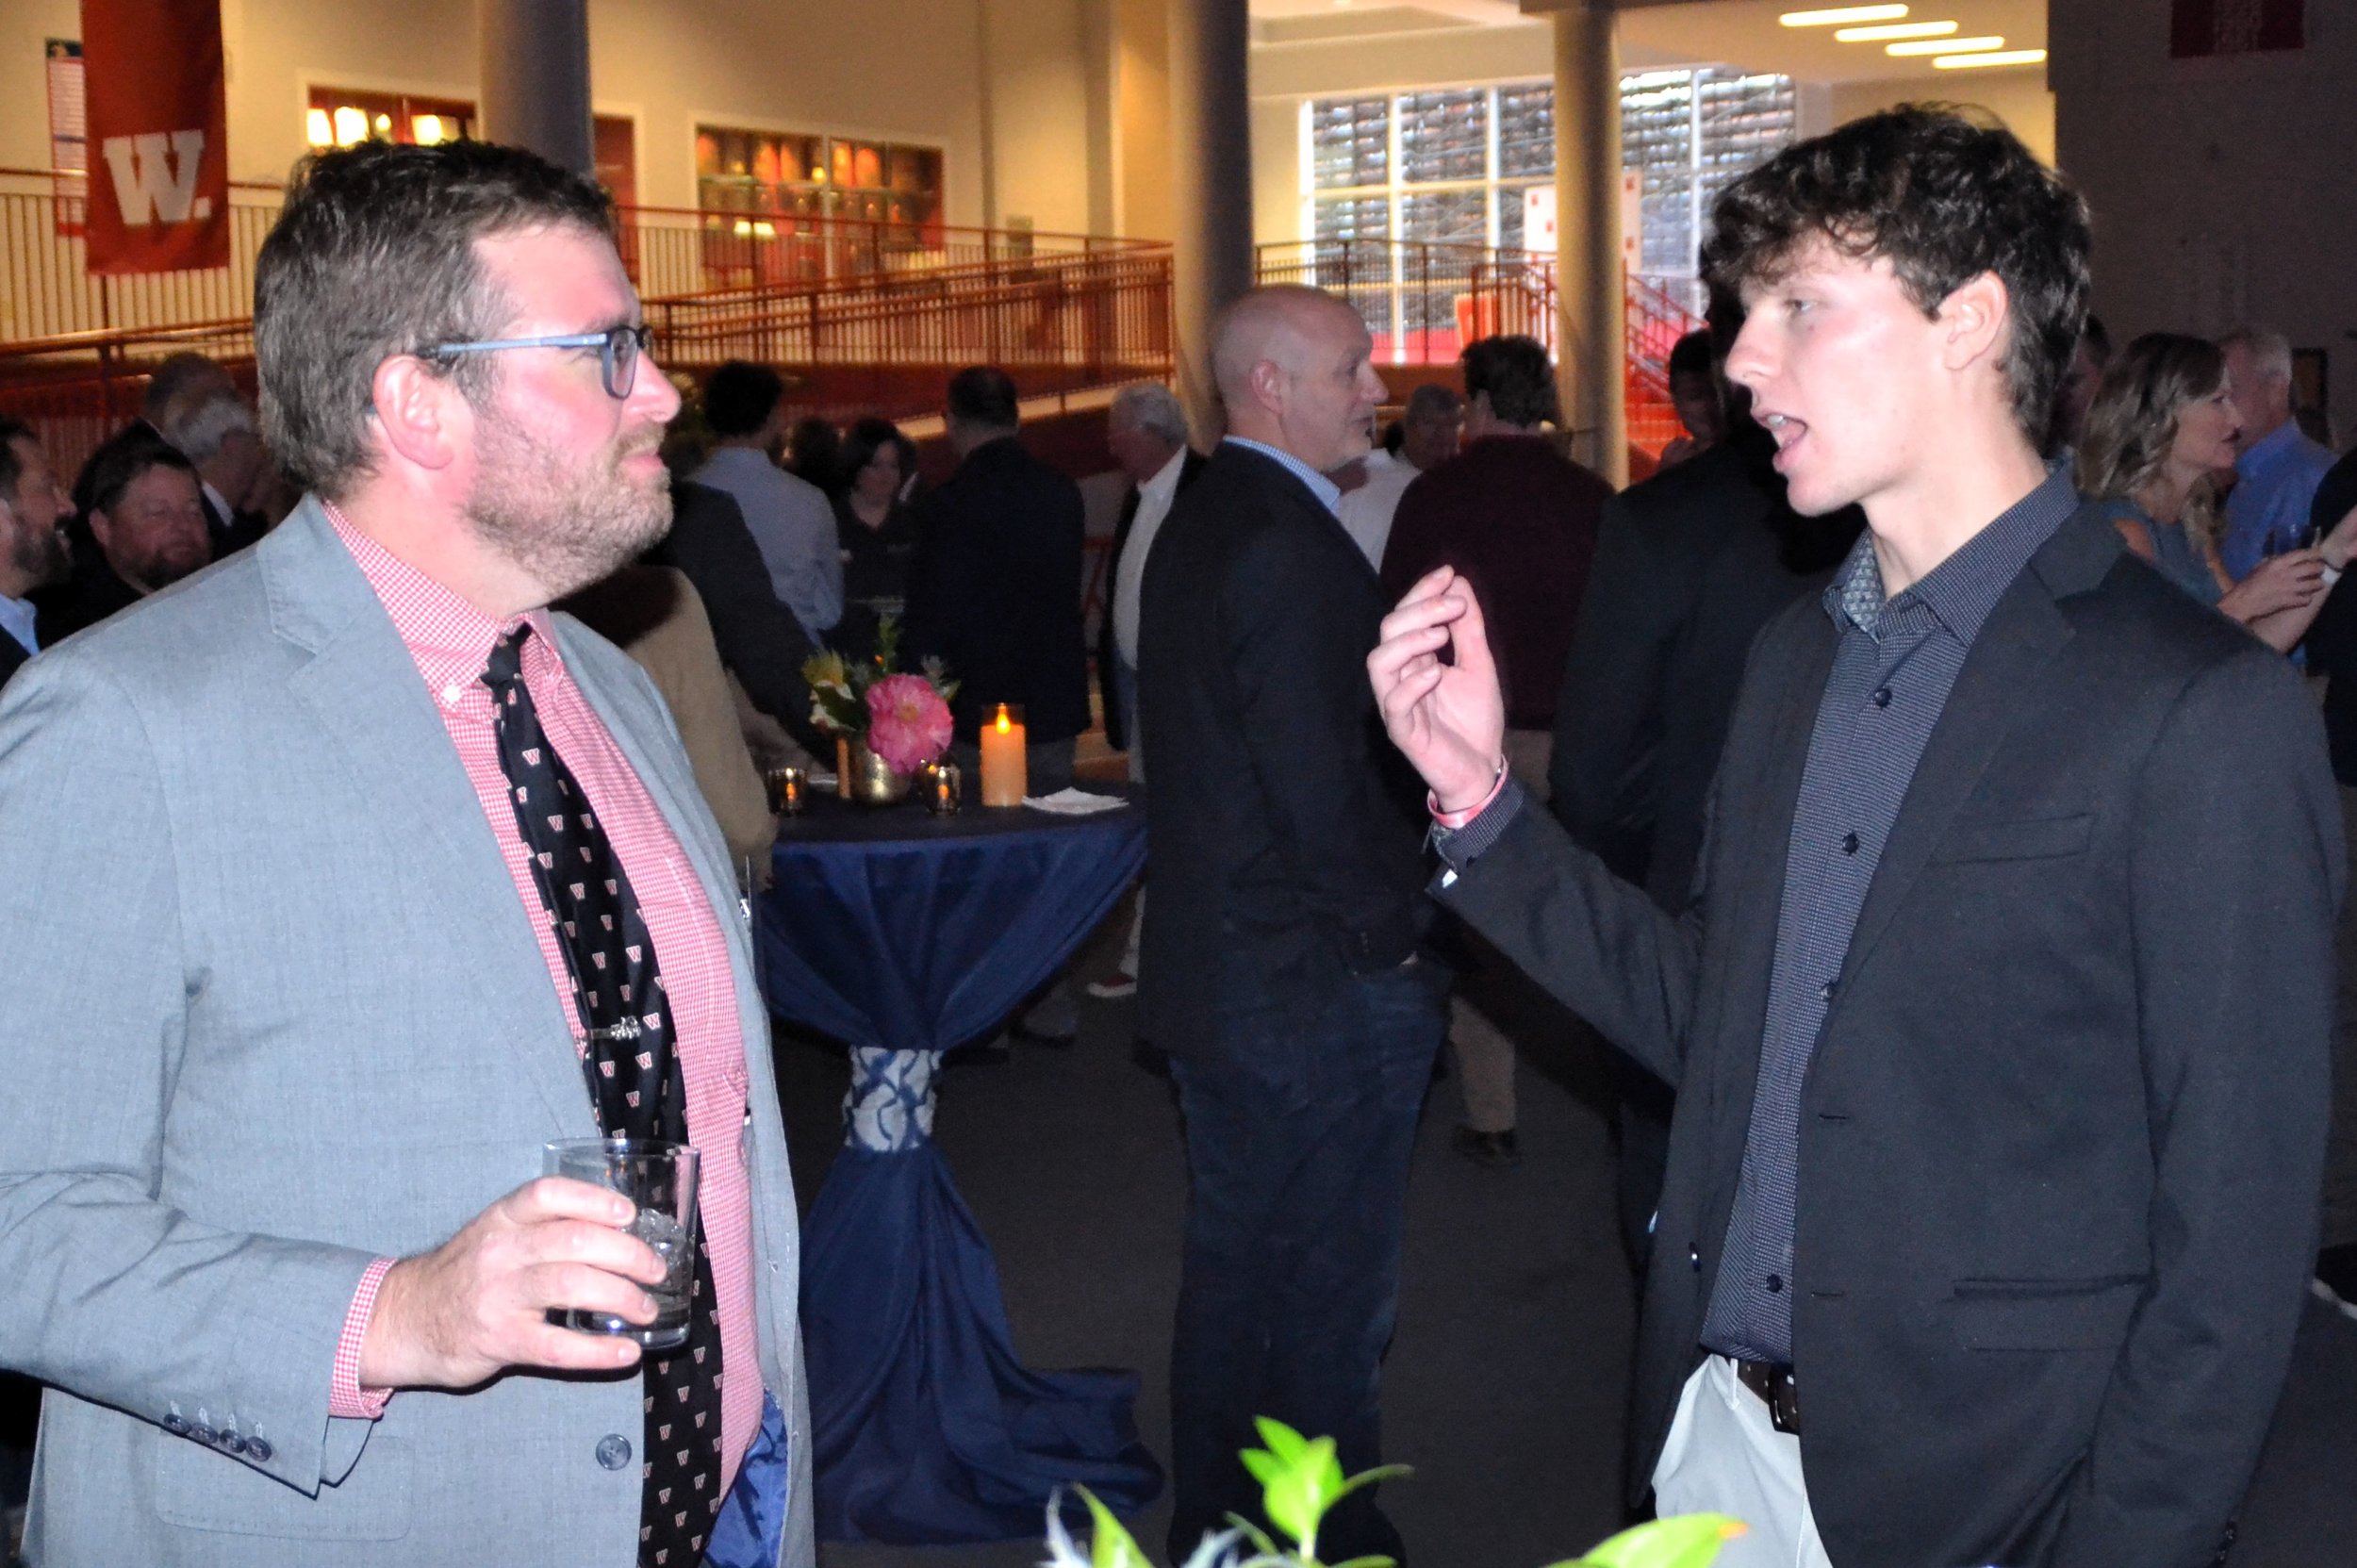  Daniel Petrie '07 chats with Chris Runyon '26 at the banquet. 